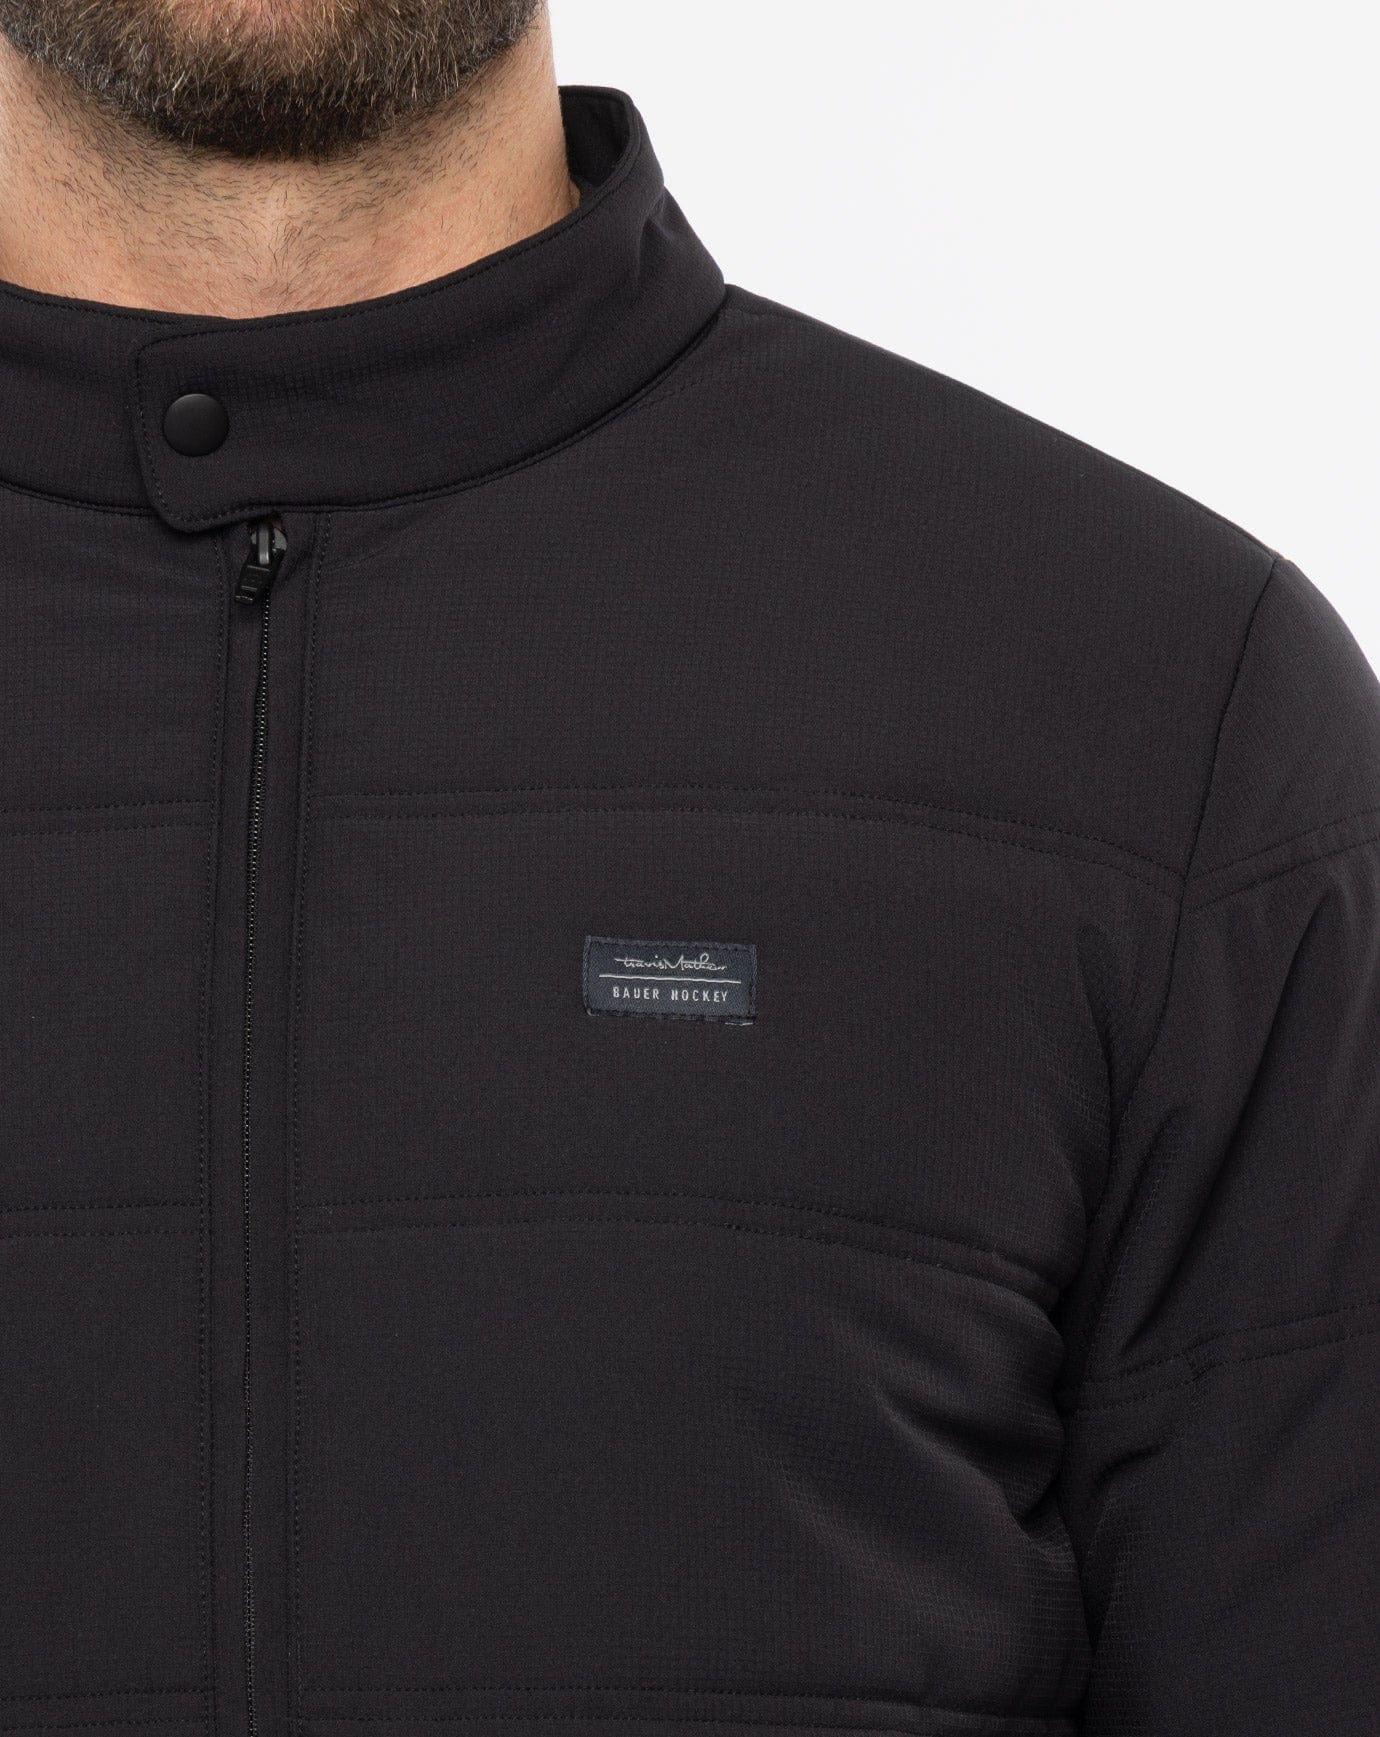 Bauer Travis Mathew Interlude Puffer Mens Jacket - The Hockey Shop Source For Sports